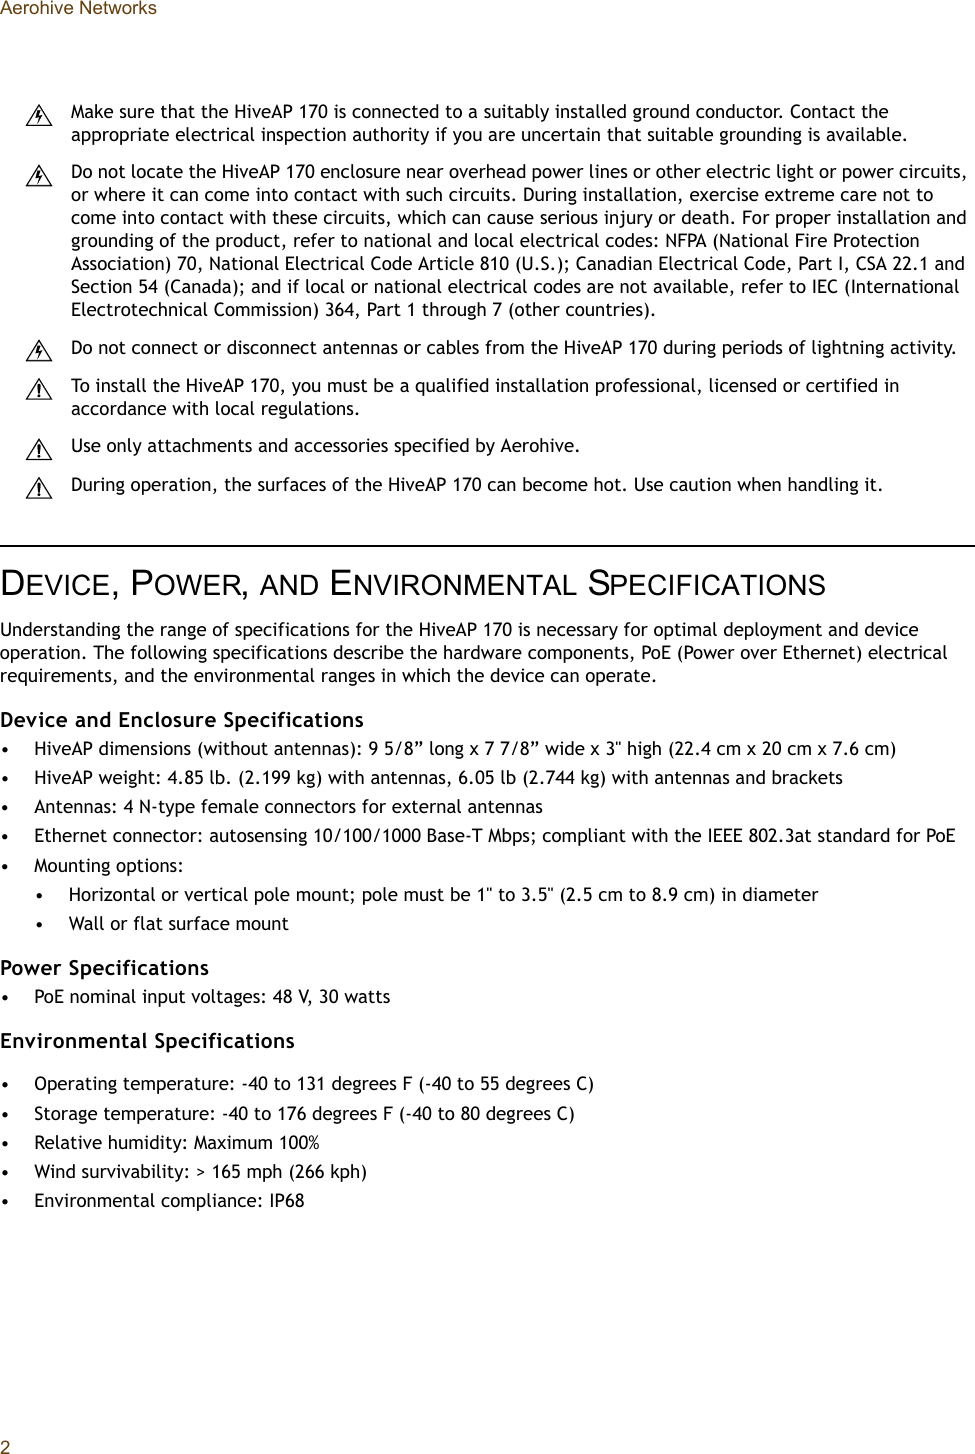 Aerohive Networks2DEVICE, POWER, AND ENVIRONMENTAL SPECIFICATIONSUnderstanding the range of specifications for the HiveAP 170 is necessary for optimal deployment and device operation. The following specifications describe the hardware components, PoE (Power over Ethernet) electrical requirements, and the environmental ranges in which the device can operate.Device and Enclosure Specifications• HiveAP dimensions (without antennas): 9 5/8” long x 7 7/8” wide x 3&quot; high (22.4 cm x 20 cm x 7.6 cm)• HiveAP weight: 4.85 lb. (2.199 kg) with antennas, 6.05 lb (2.744 kg) with antennas and brackets• Antennas: 4 N-type female connectors for external antennas• Ethernet connector: autosensing 10/100/1000 Base-T Mbps; compliant with the IEEE 802.3at standard for PoE• Mounting options: • Horizontal or vertical pole mount; pole must be 1&quot; to 3.5&quot; (2.5 cm to 8.9 cm) in diameter• Wall or flat surface mountPower Specifications• PoE nominal input voltages: 48 V, 30 wattsEnvironmental Specifications• Operating temperature: -40 to 131 degrees F (-40 to 55 degrees C)• Storage temperature: -40 to 176 degrees F (-40 to 80 degrees C)• Relative humidity: Maximum 100%• Wind survivability: &gt; 165 mph (266 kph)• Environmental compliance: IP68Make sure that the HiveAP 170 is connected to a suitably installed ground conductor. Contact the appropriate electrical inspection authority if you are uncertain that suitable grounding is available.Do not locate the HiveAP 170 enclosure near overhead power lines or other electric light or power circuits, or where it can come into contact with such circuits. During installation, exercise extreme care not to come into contact with these circuits, which can cause serious injury or death. For proper installation and grounding of the product, refer to national and local electrical codes: NFPA (National Fire Protection Association) 70, National Electrical Code Article 810 (U.S.); Canadian Electrical Code, Part I, CSA 22.1 and Section 54 (Canada); and if local or national electrical codes are not available, refer to IEC (International Electrotechnical Commission) 364, Part 1 through 7 (other countries).Do not connect or disconnect antennas or cables from the HiveAP 170 during periods of lightning activity.To install the HiveAP 170, you must be a qualified installation professional, licensed or certified in accordance with local regulations.Use only attachments and accessories specified by Aerohive.During operation, the surfaces of the HiveAP 170 can become hot. Use caution when handling it.